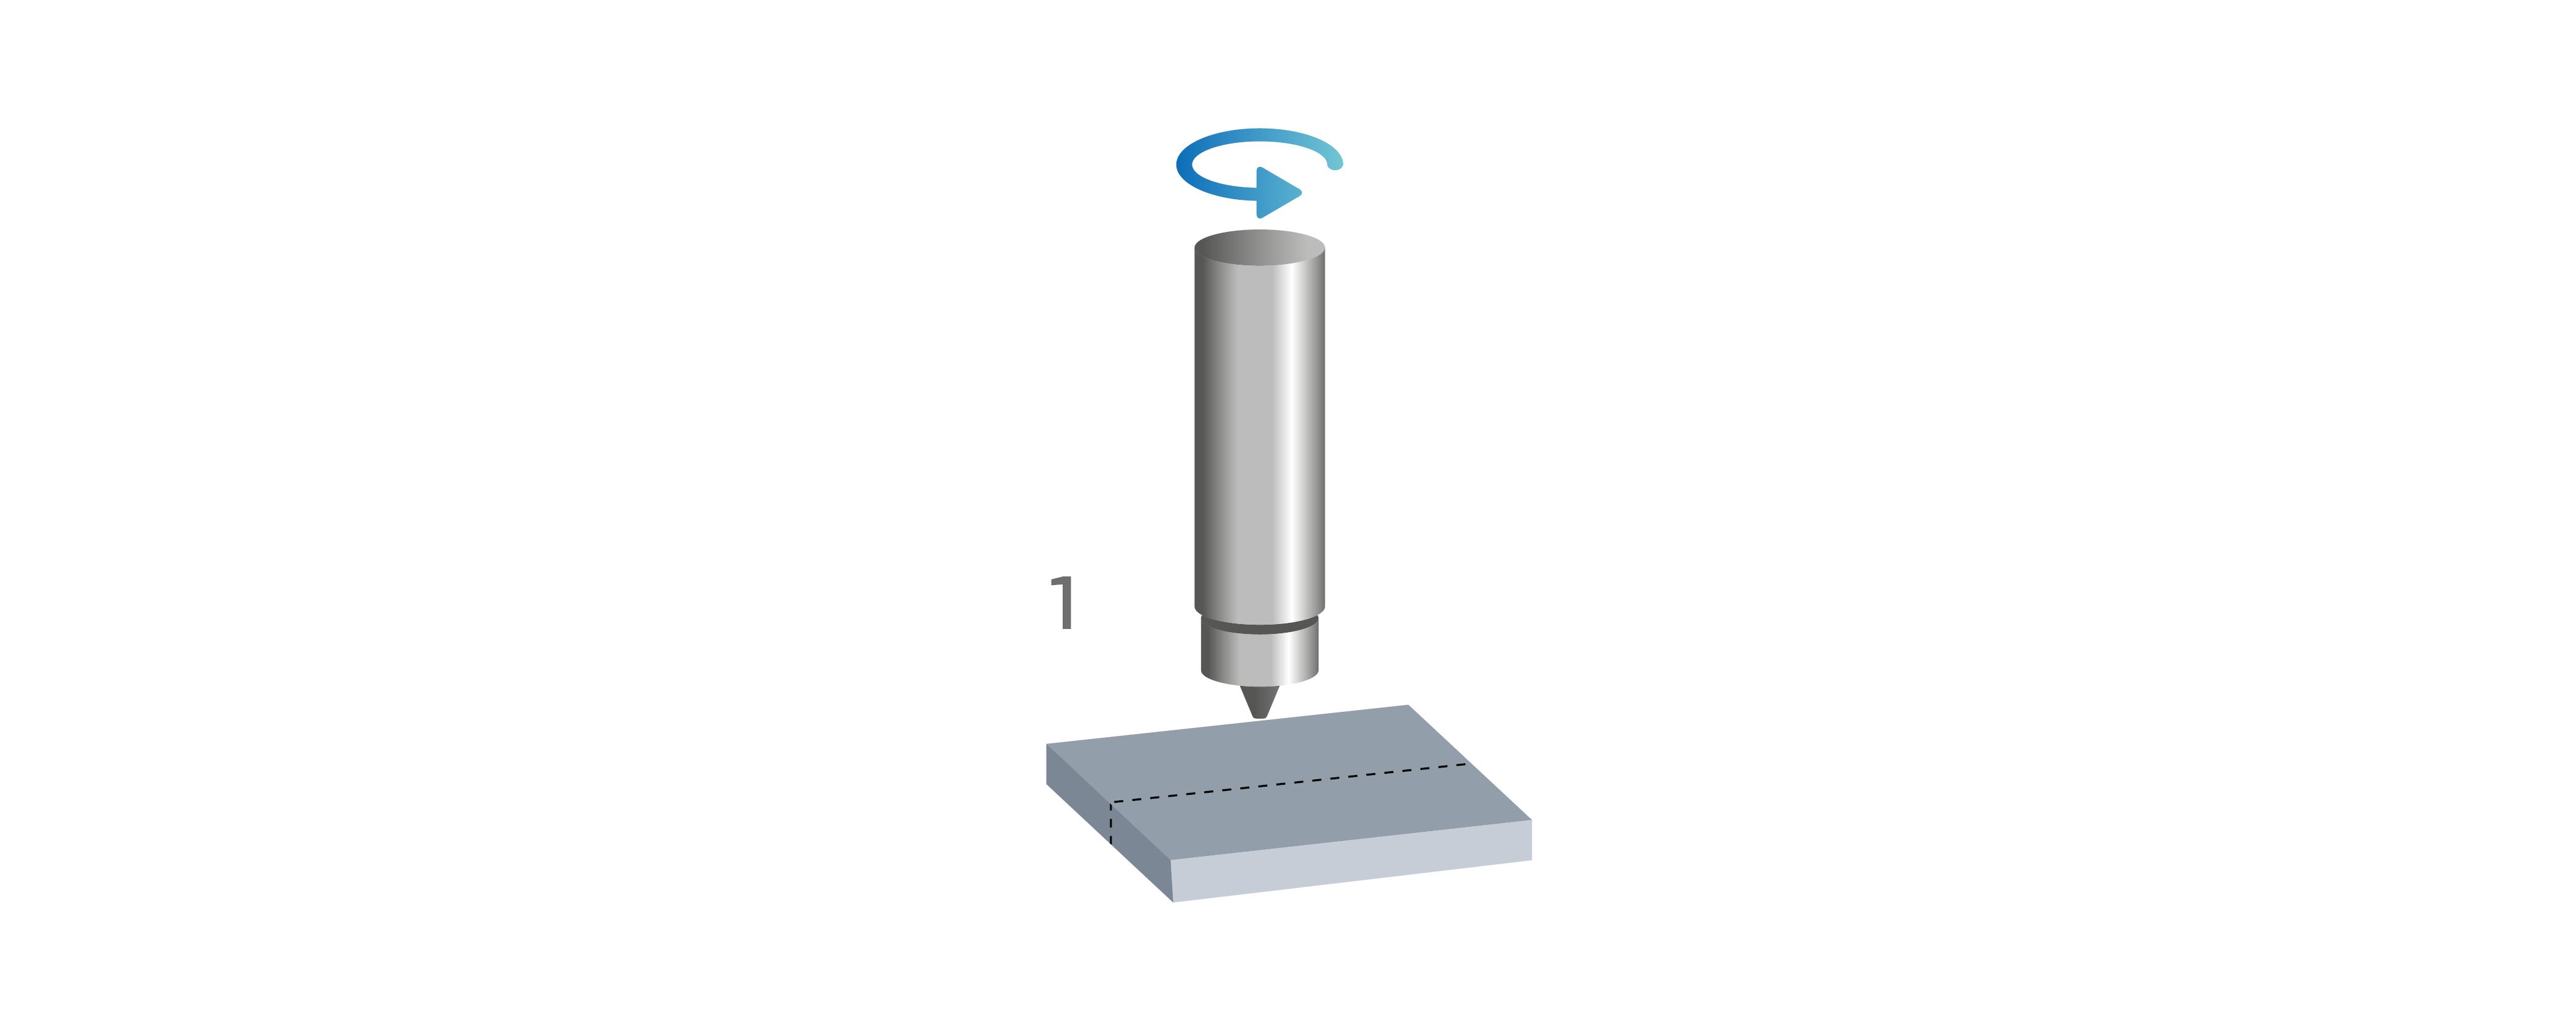 A wear-resistant tool is set in a spindle and rotates.